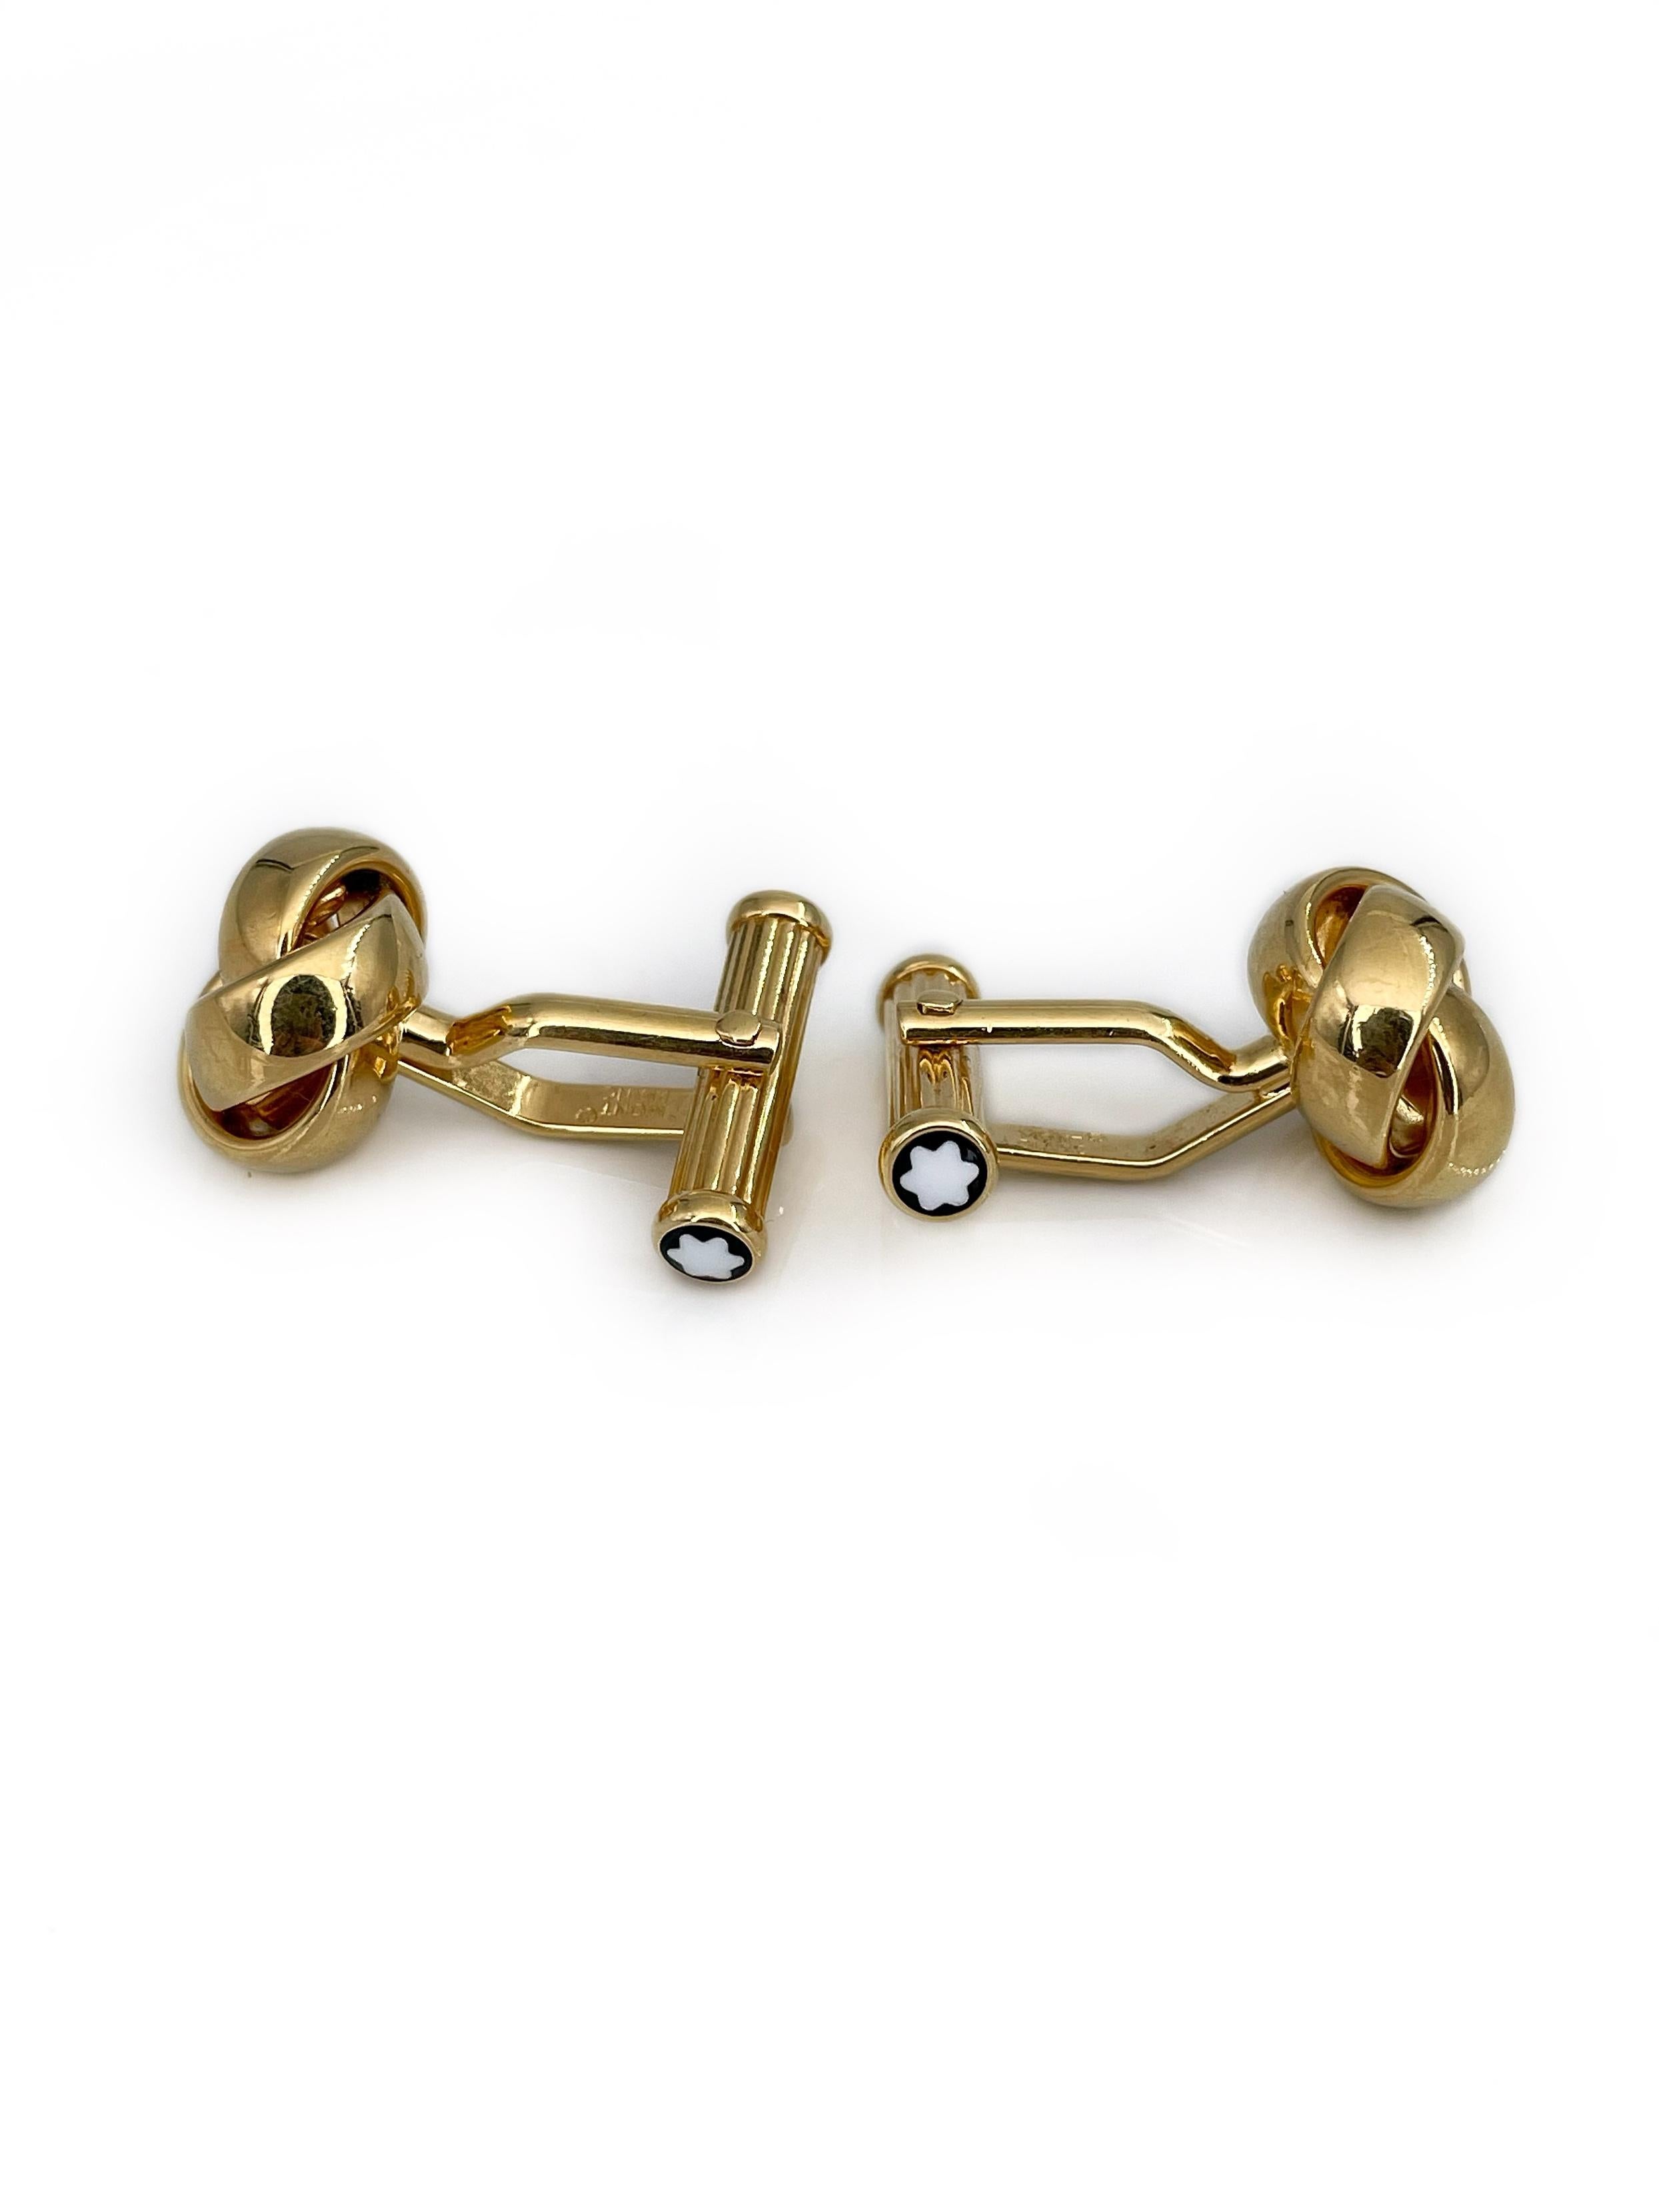 This is a classic pair of round twisted knot cufflinks designed by Montblanc in 2000’s. The piece is gold plated. The cufflinks fasten with a T-bar. 

Signed: “Mont Blanc. Germany”

Perfect gift for a man. 

Head diameter: 1.3cm

———

If you have